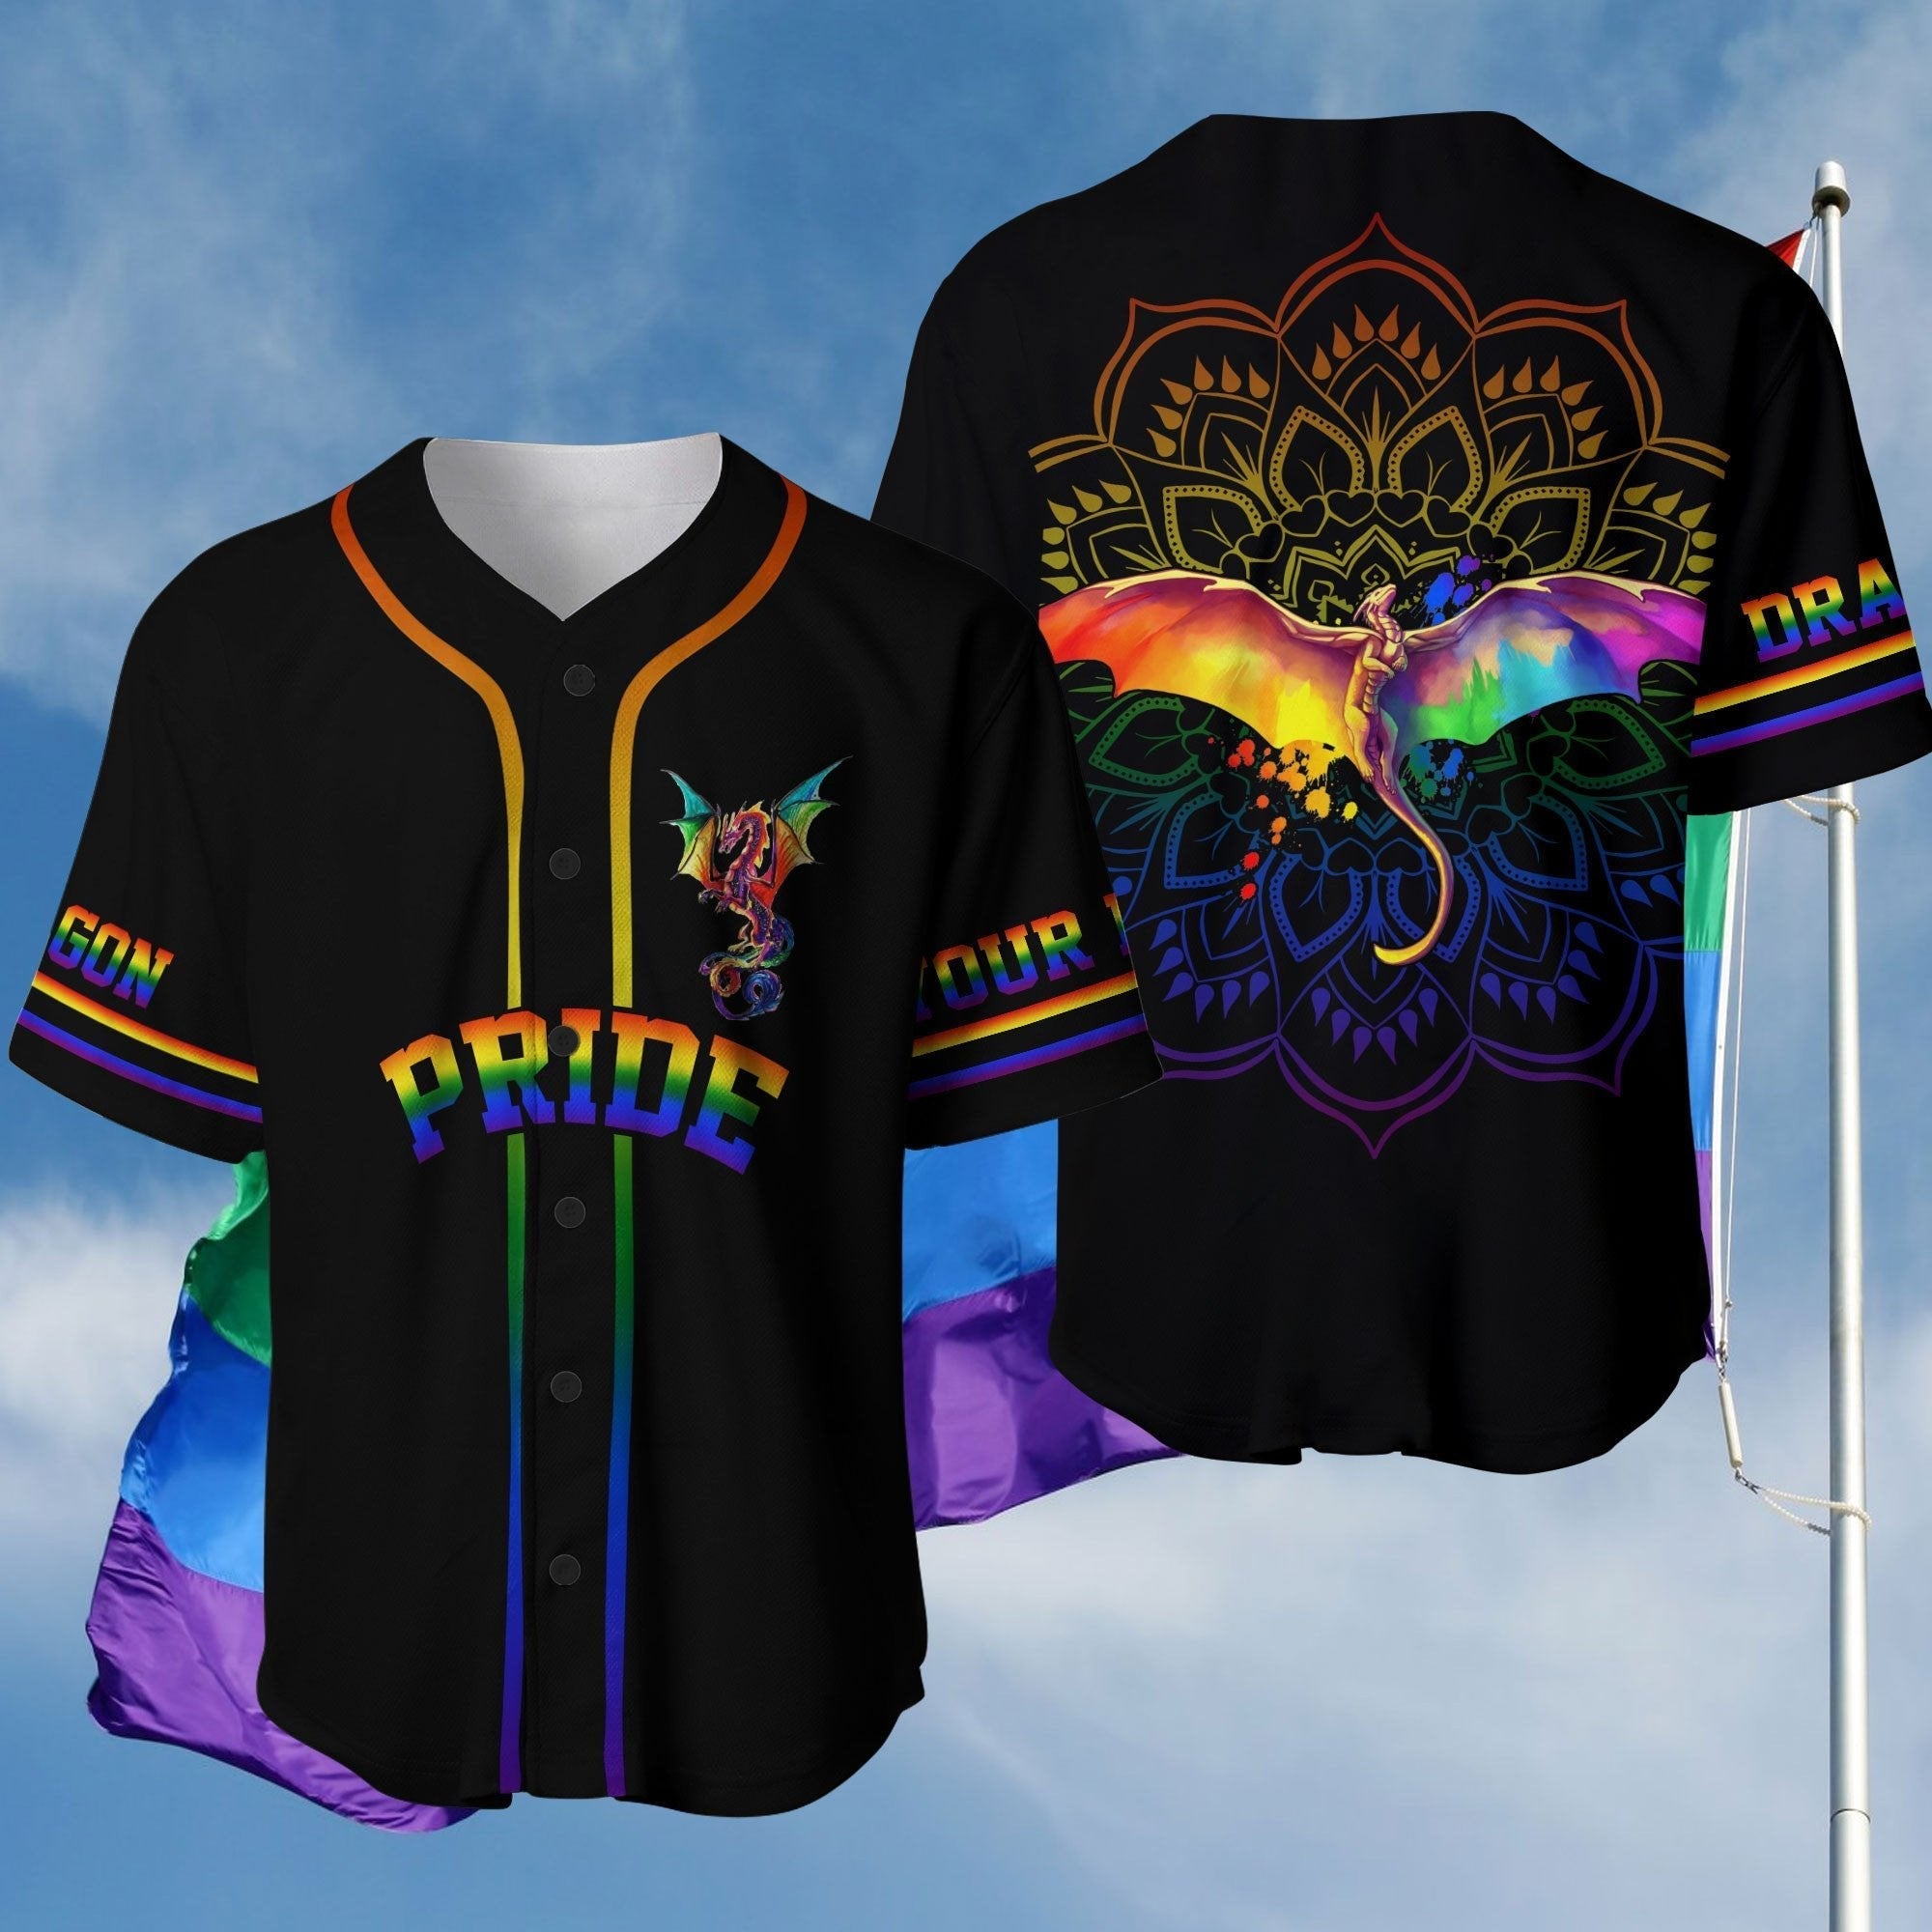 LGBT Human Beings Color May Vary Personalized Baseball Jersey